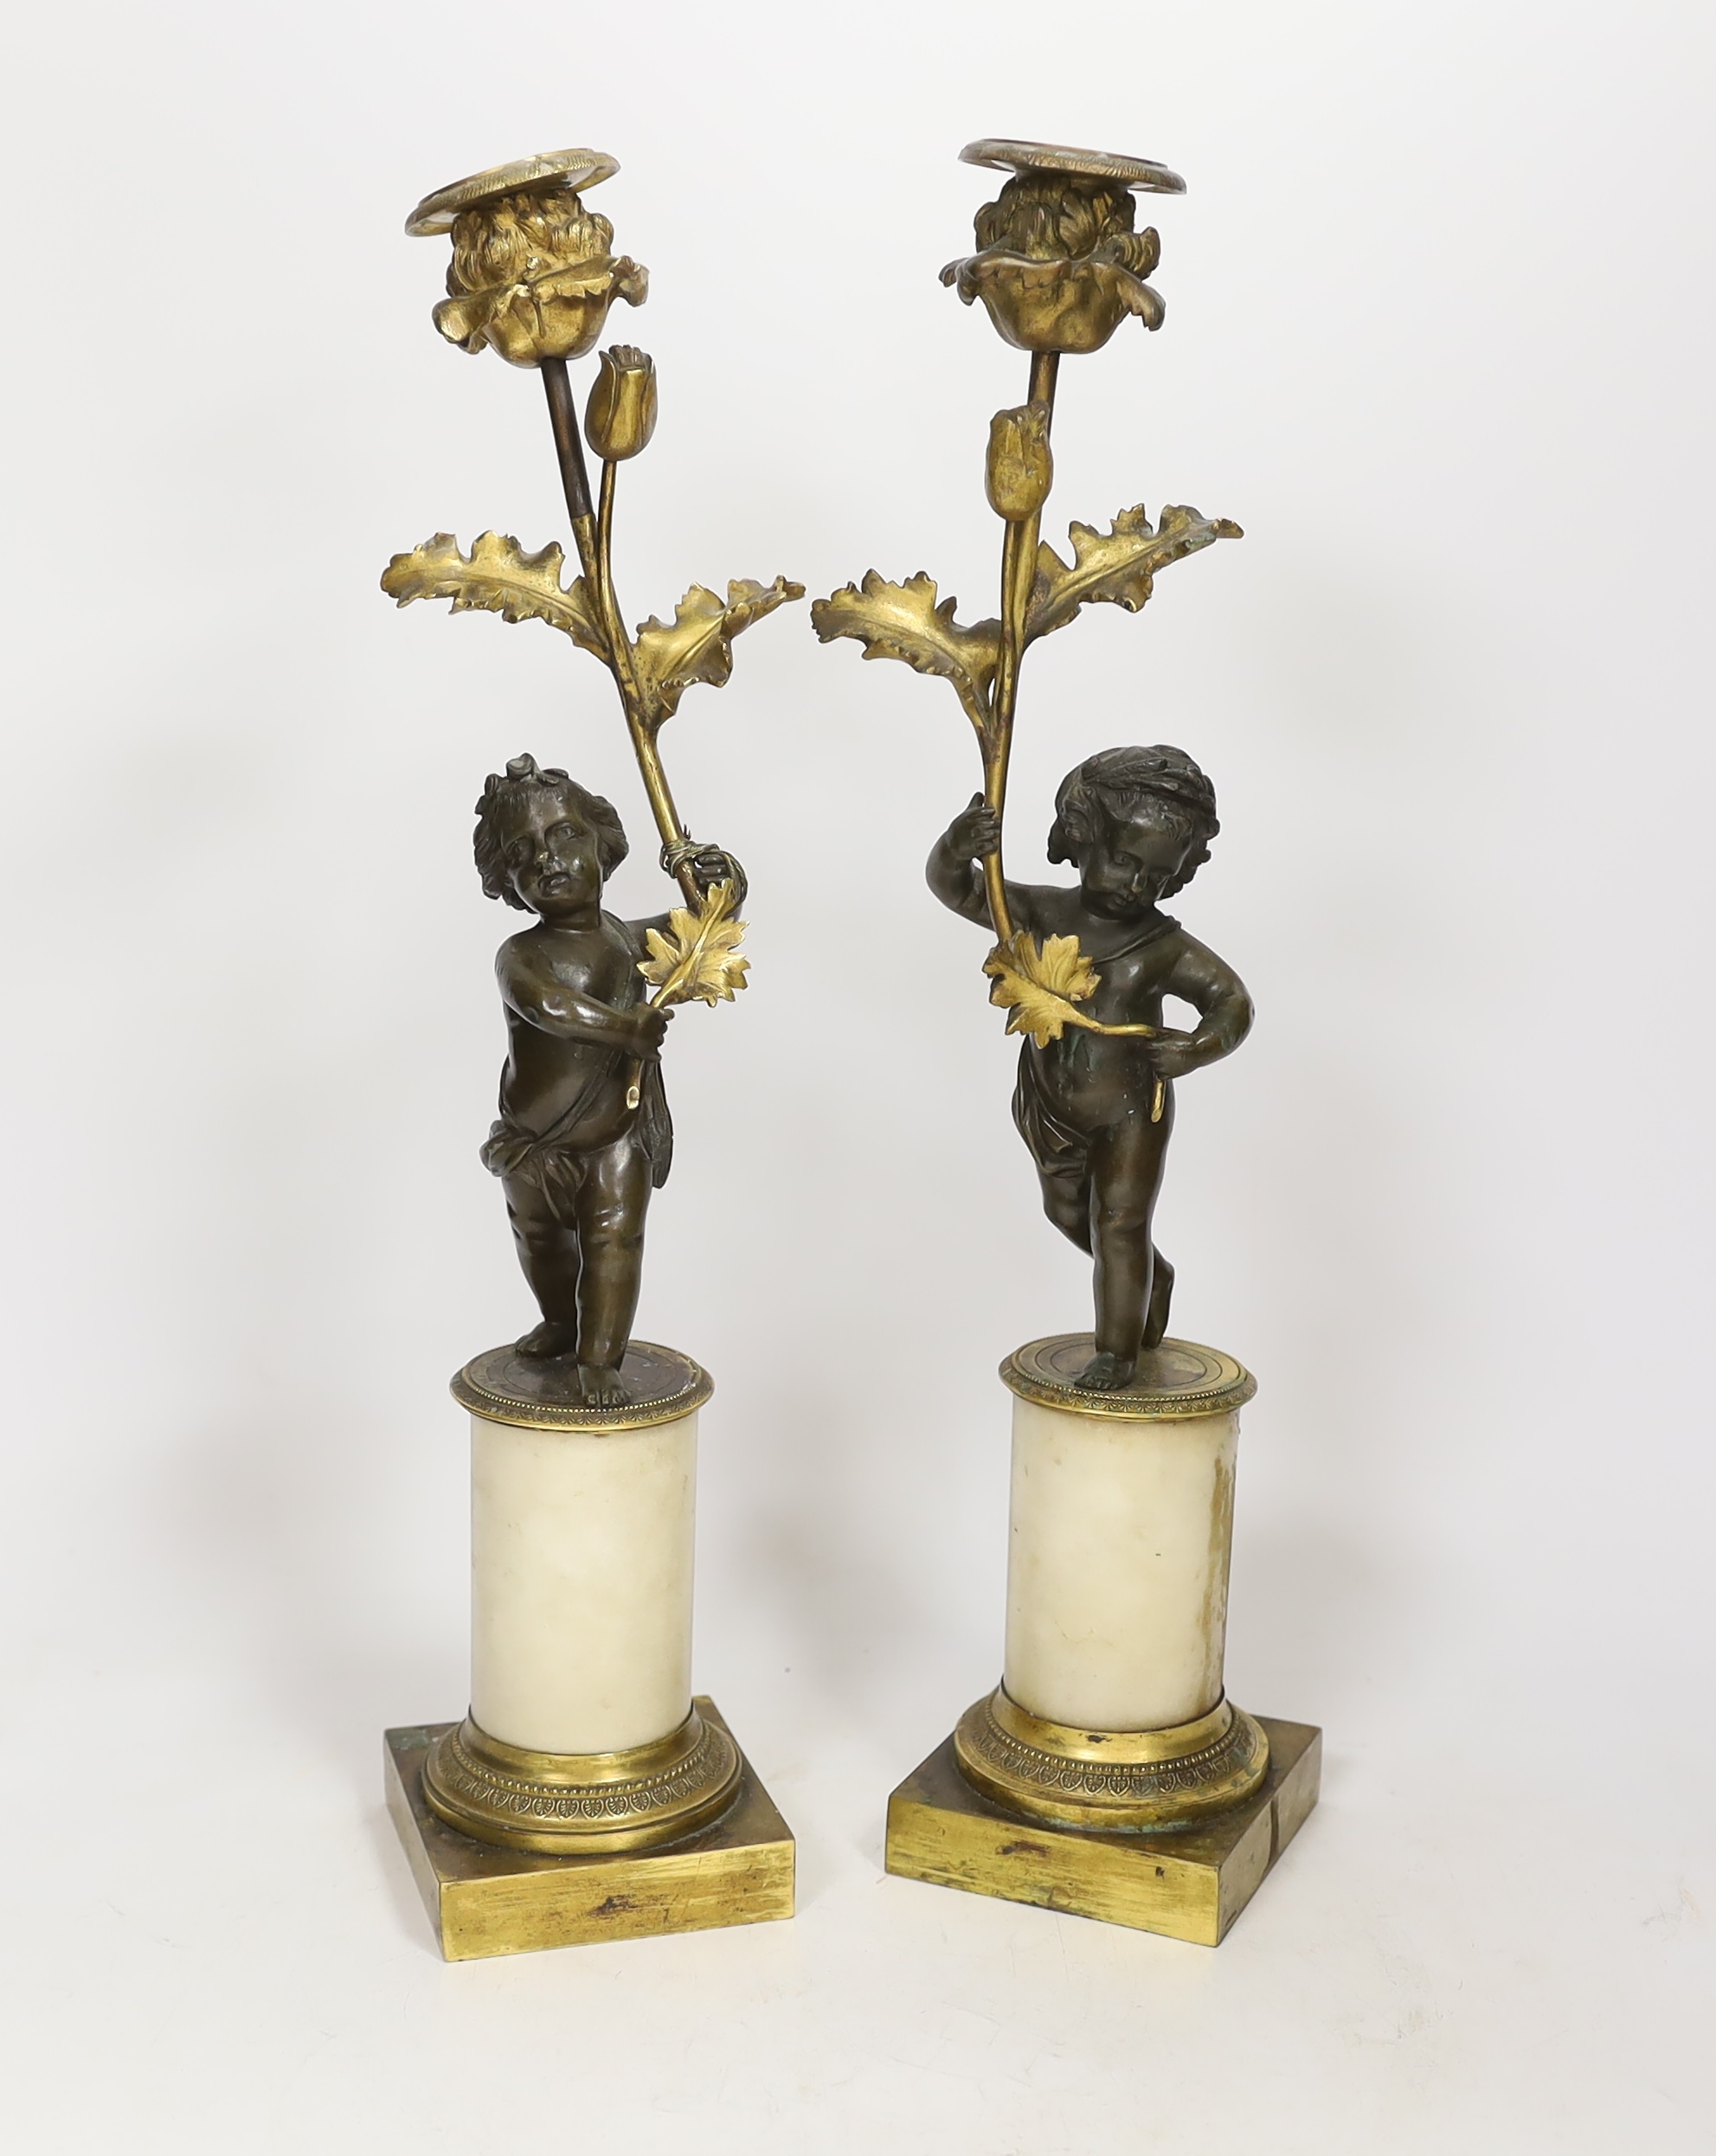 A pair of Regency bronze and ormolu amorini candlesticks, with white marble plinths, 40cm. Condition - fair